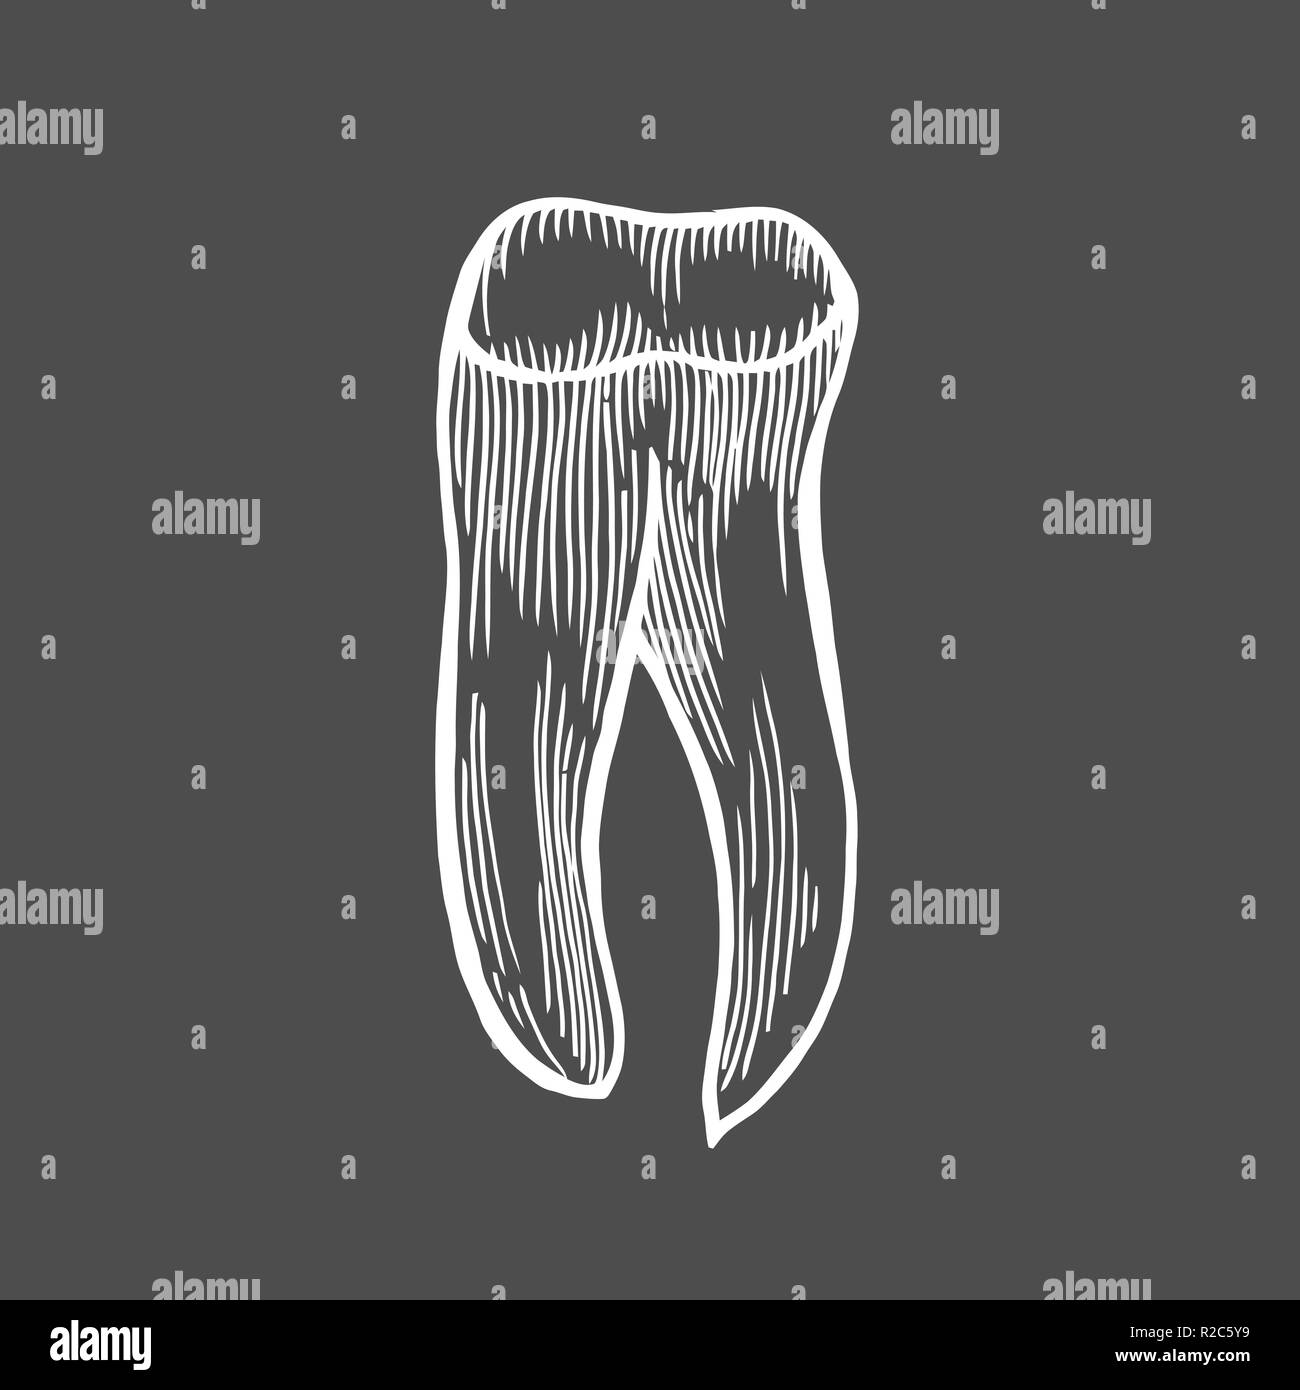 Vector engraving illustration of highly detailed hand drawn human tooth isolated on black background Stock Vector